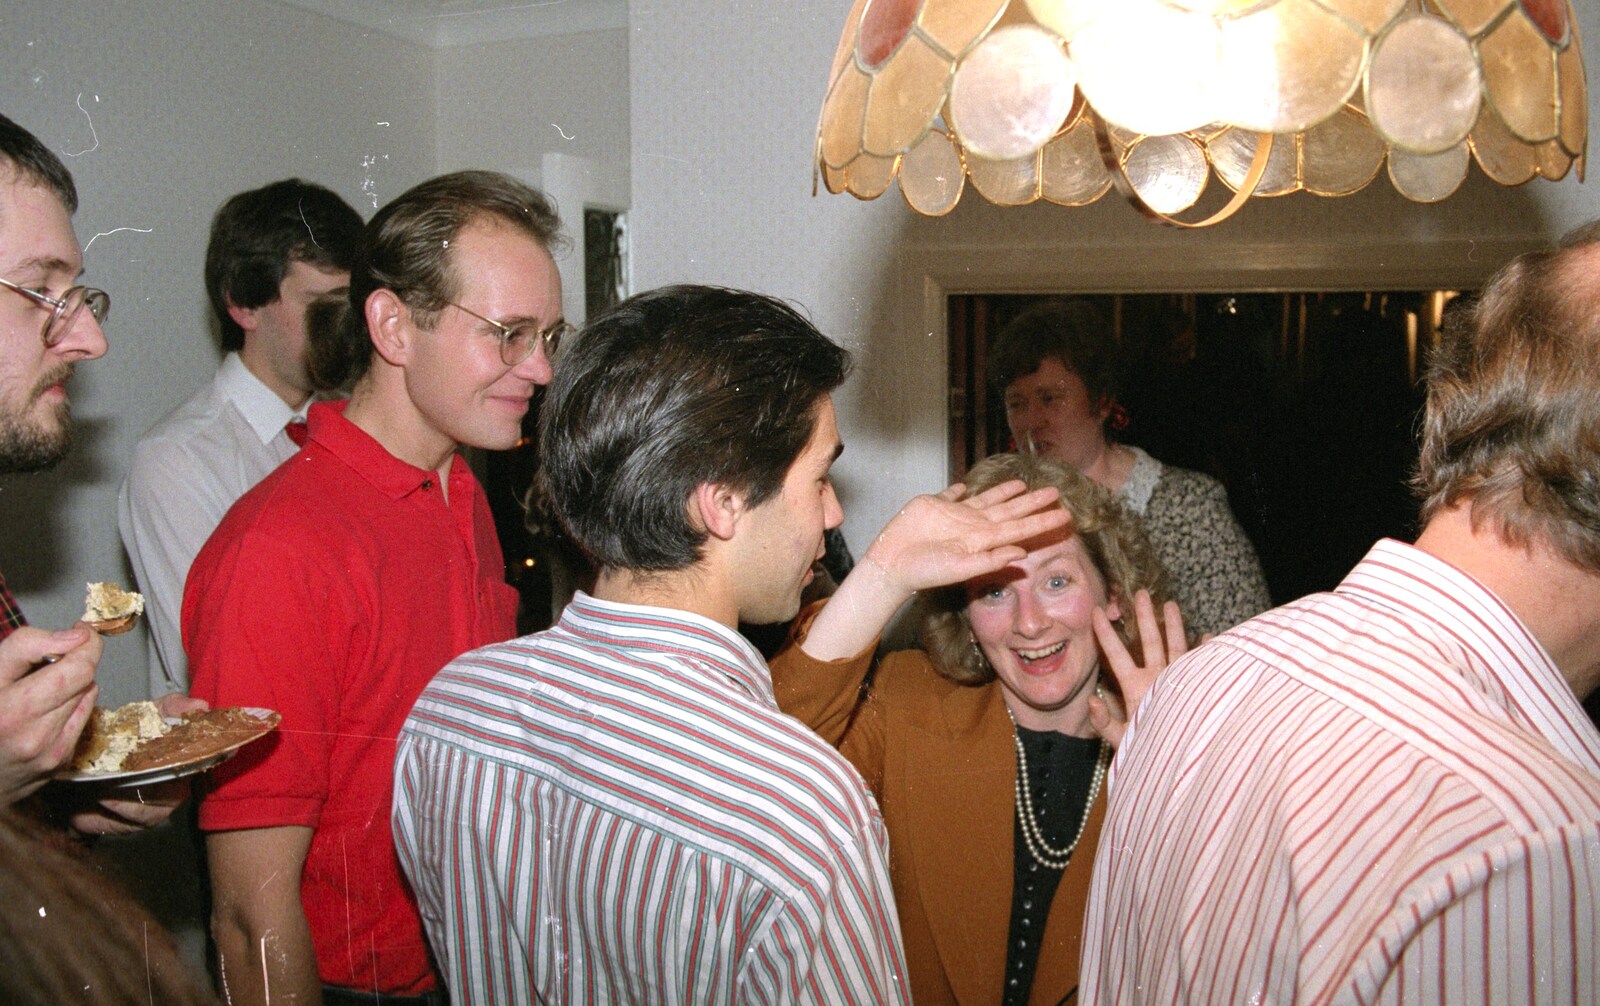 Phil and Nigel from New Year's Eve at Phil's, Hordle, Hampshire - 31st December 1990